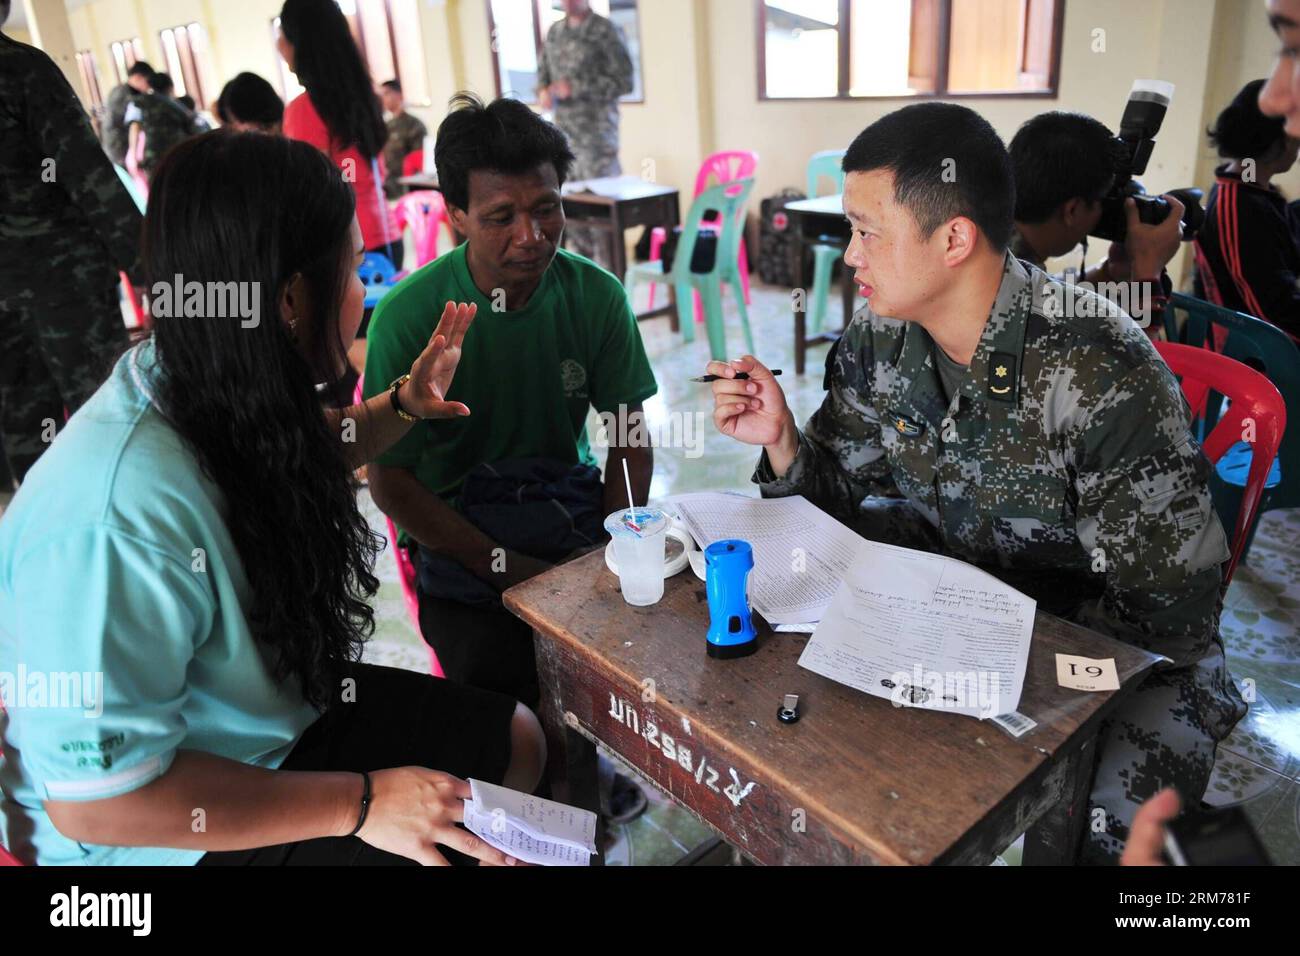 (140218) -- PITSANULOKE, Feb. 18, 2014 (Xinhua) -- A staff member of medical team from the Chinese military gives medical advice to locals at a school in Pitsanuloke Province, Thailand, Feb. 18, 2014. China has sent troops to attend the multilateral military exercise Cobra Gold, led by the United States and Thailand, for the first time. The seventeen-strong Chinese squad will take part in operations at the command and coordination center, engineering assistance, medical aid as well as discussions and exchanges of military medical sciences, according to officers with the foreign affairs office Stock Photo